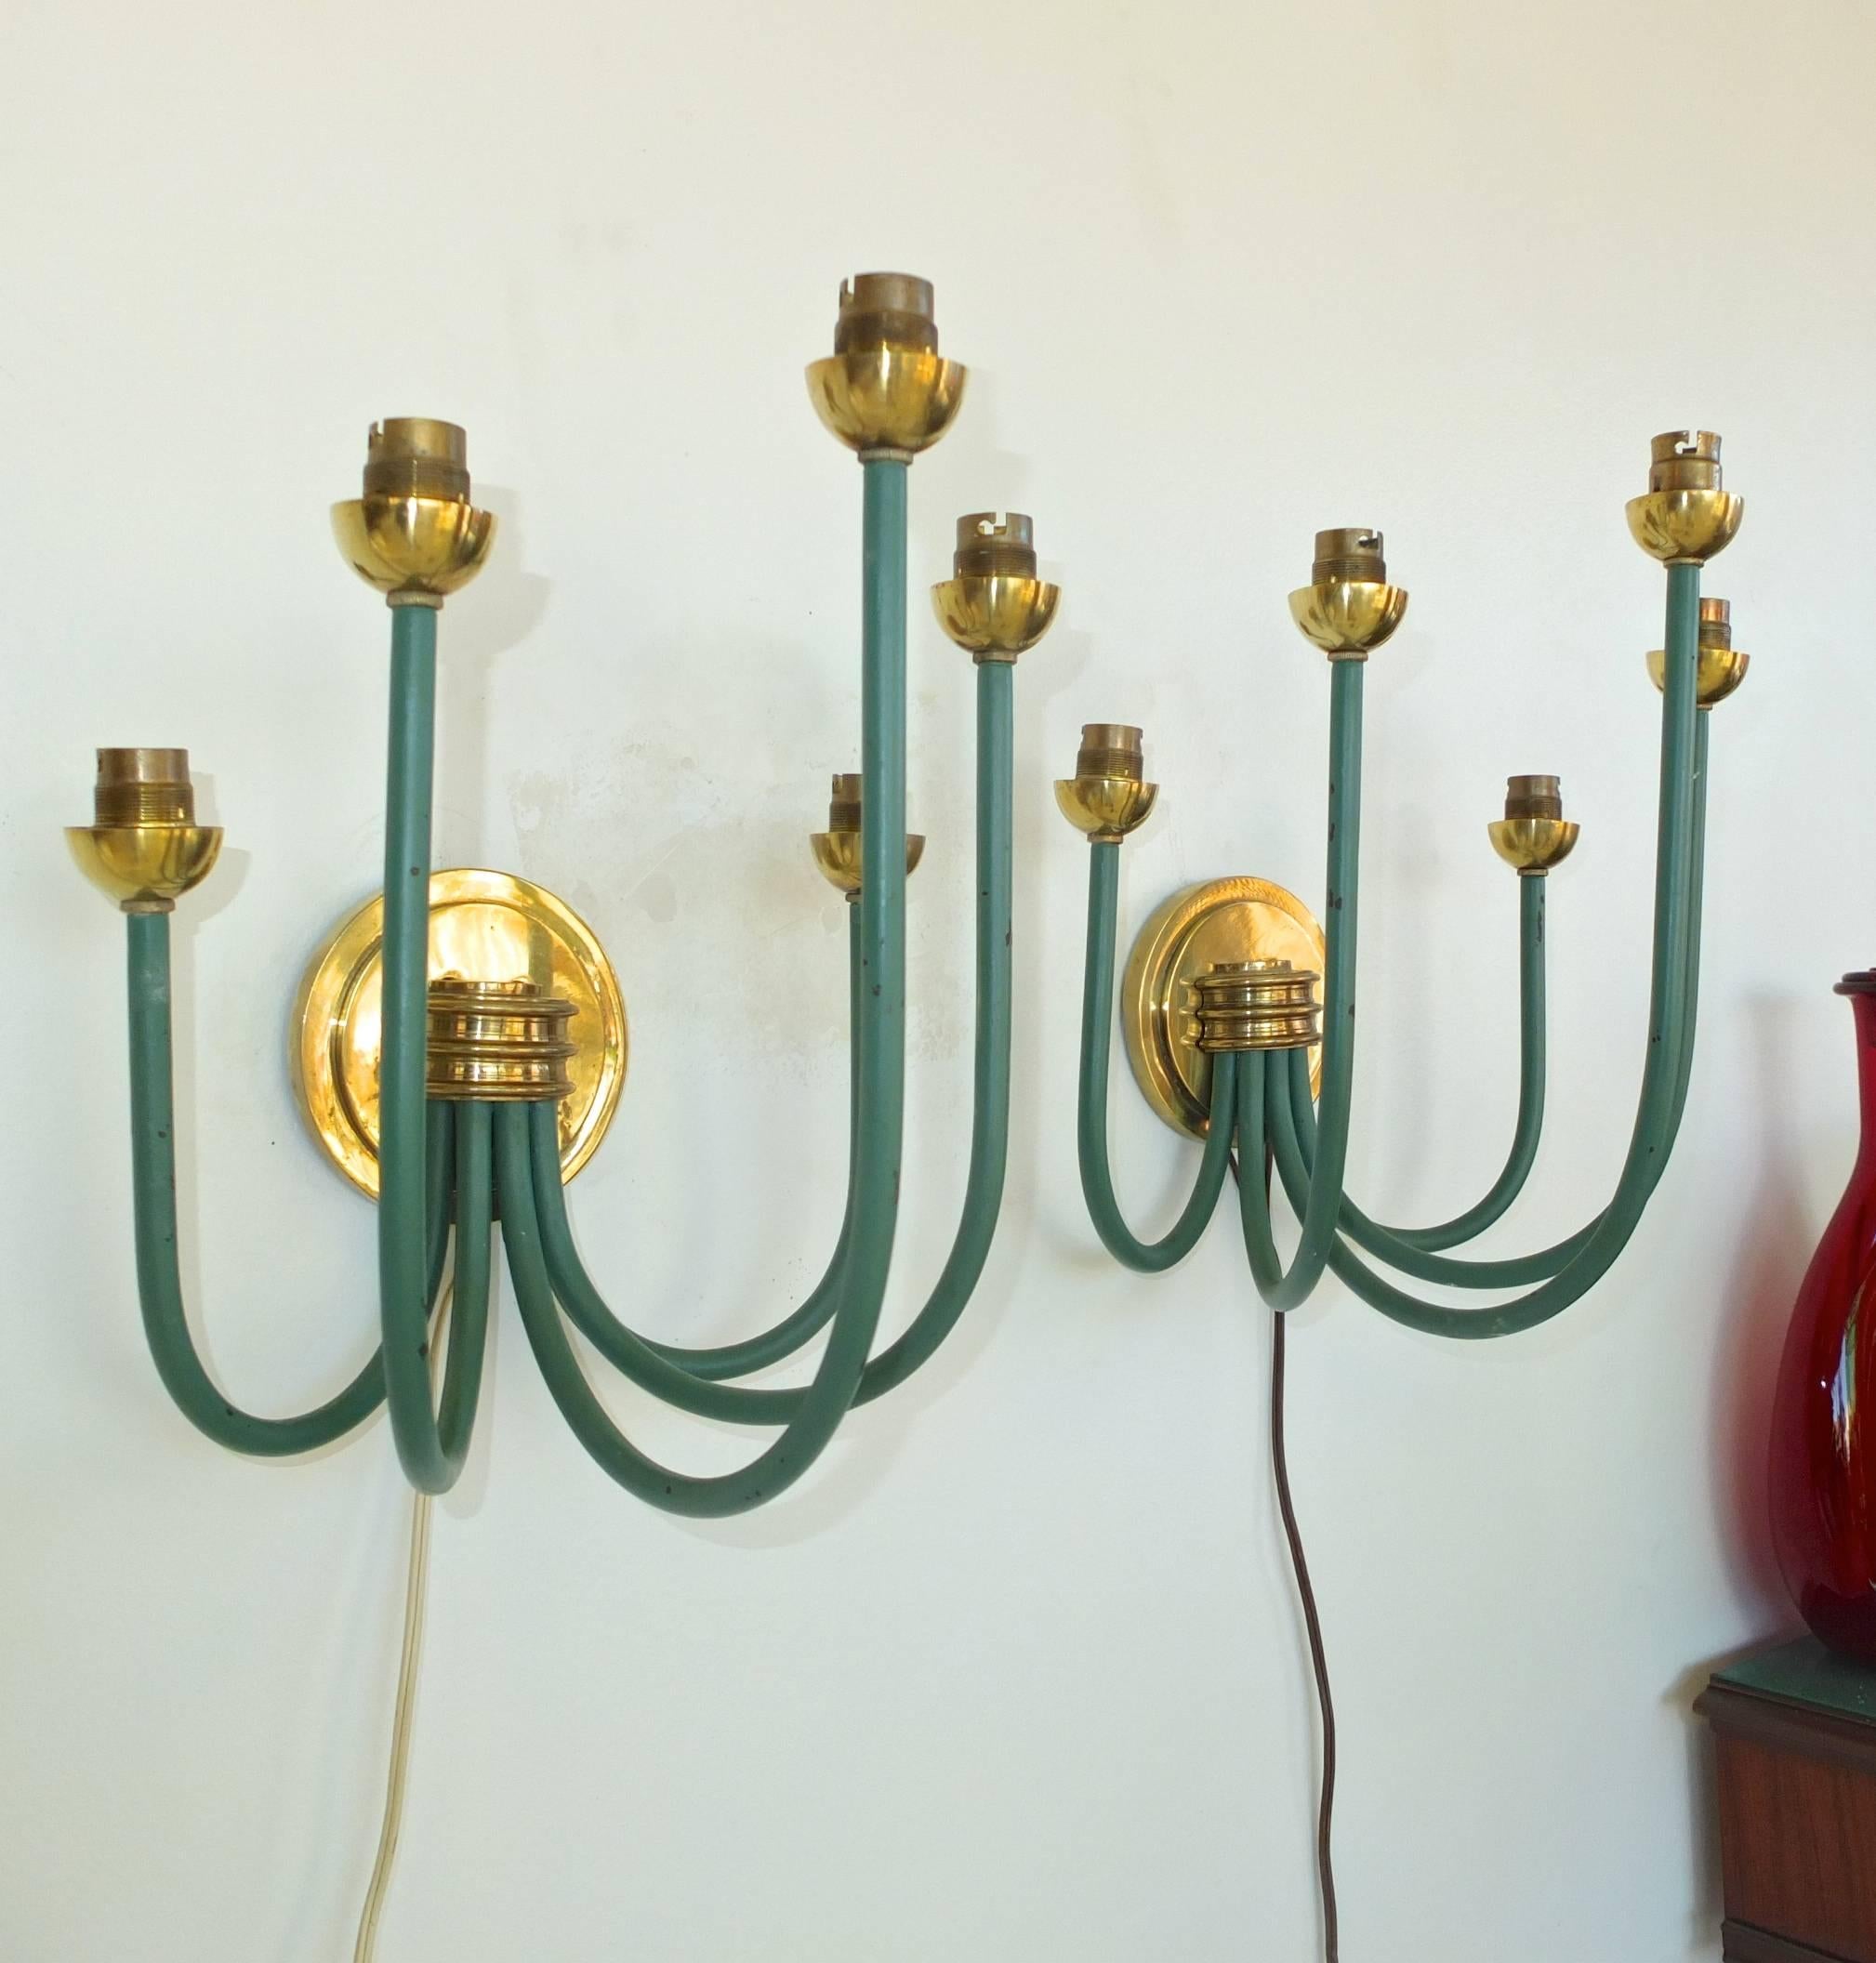 Enameled French Large-Scale Five Branch Wall Sconces in Brass and Green Painted Iron